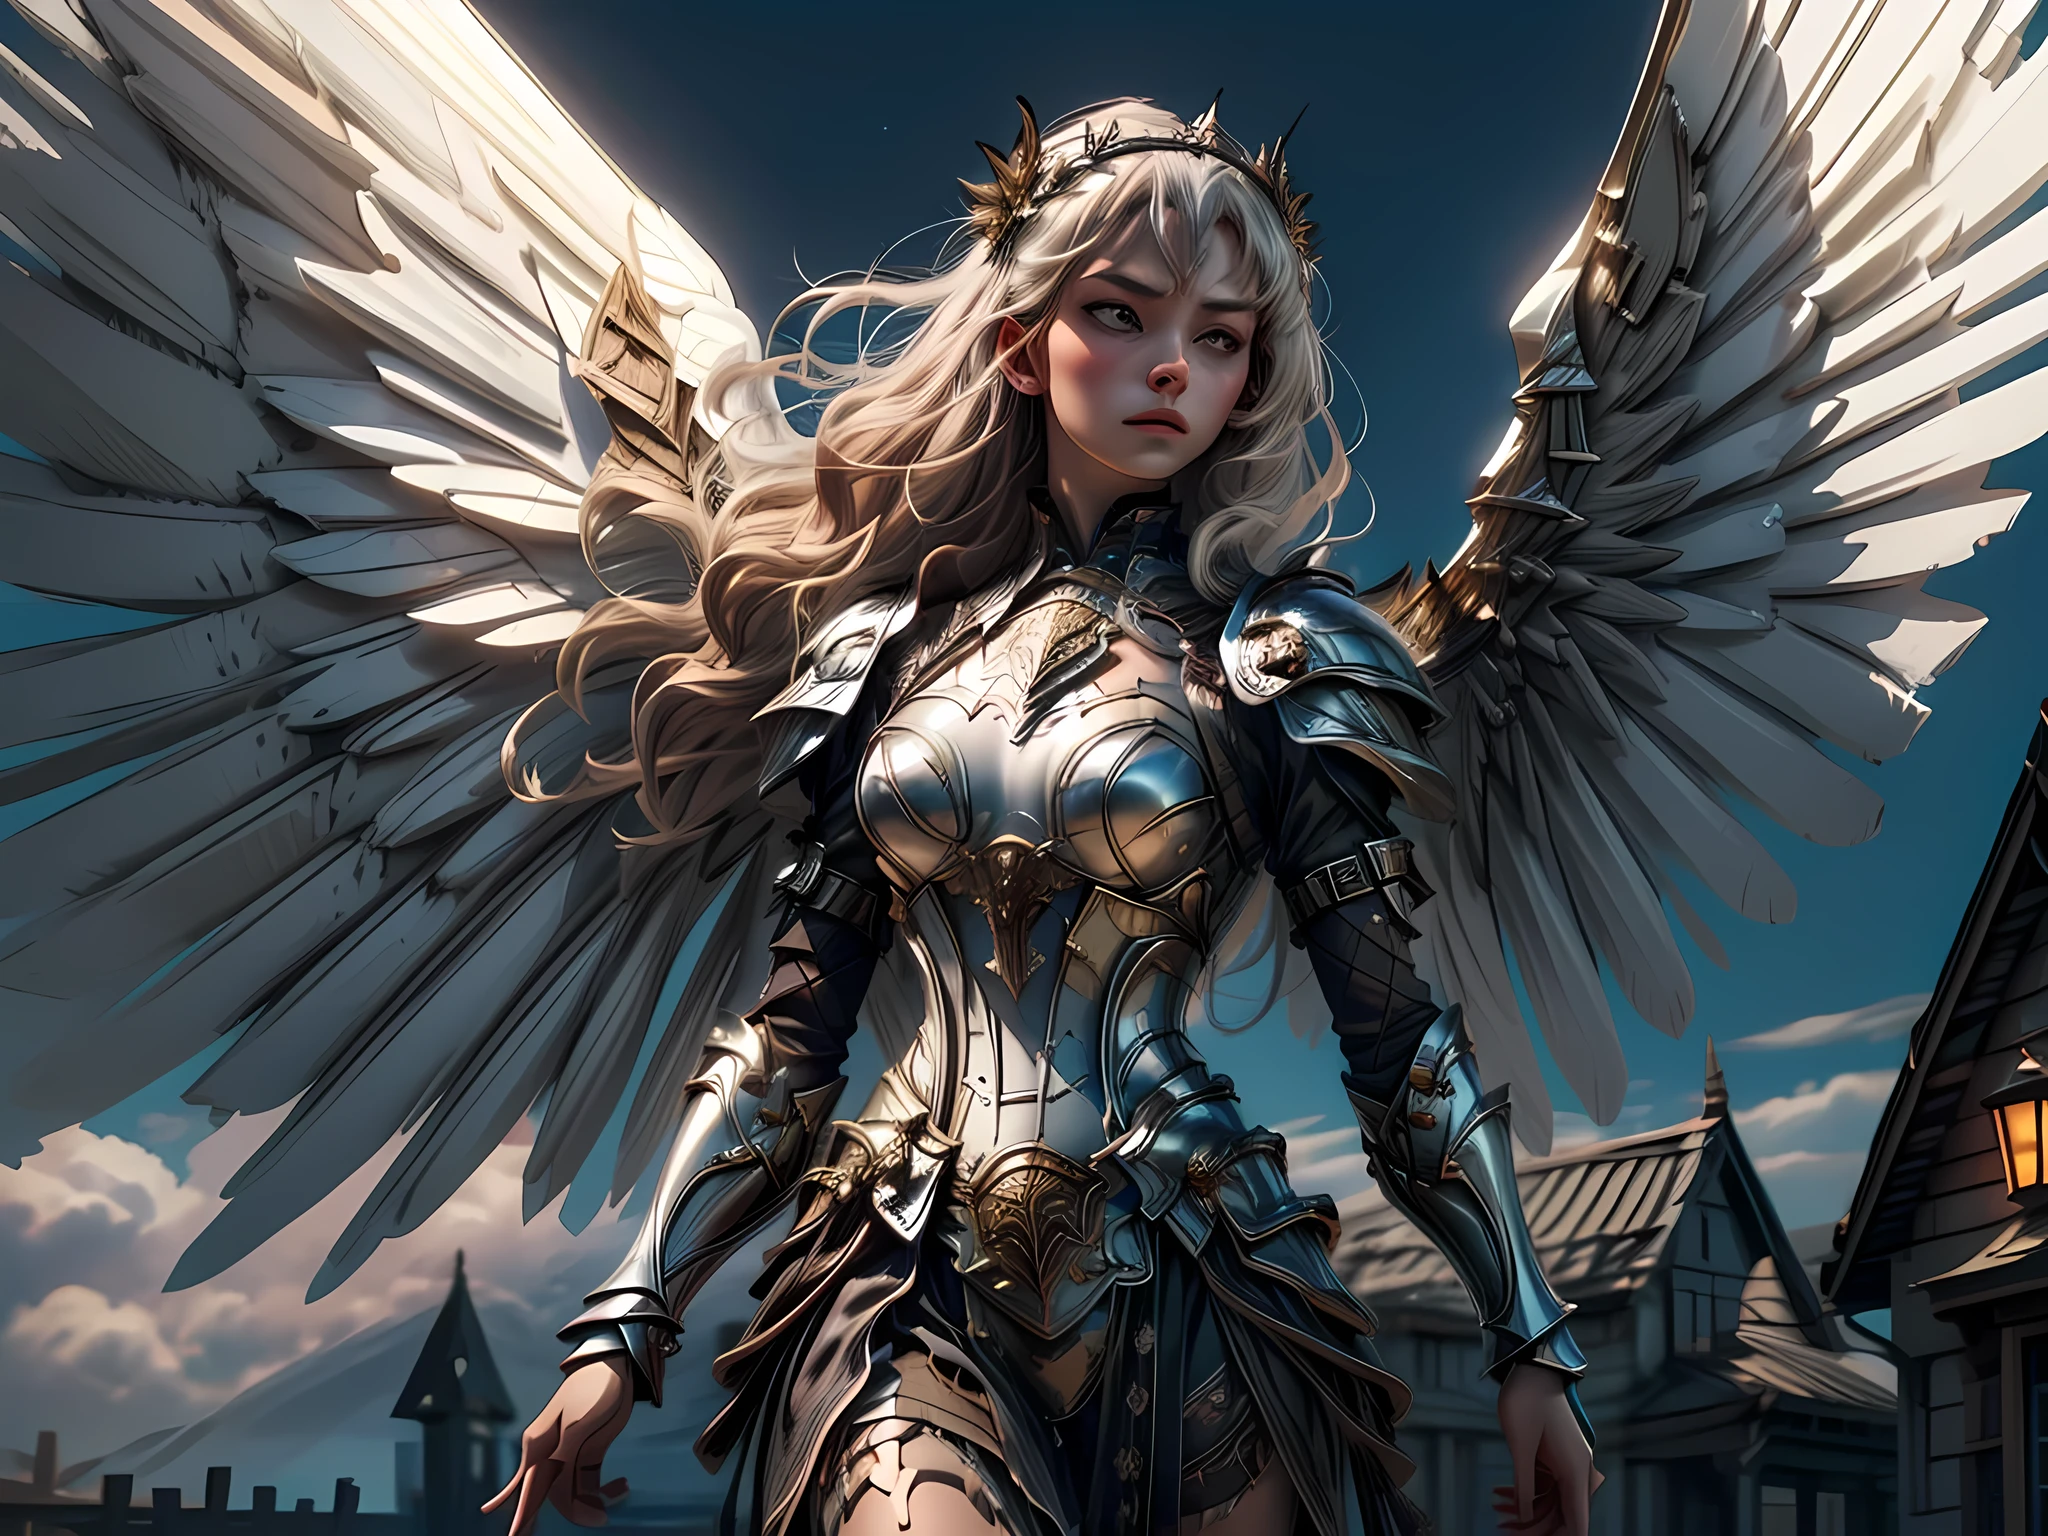 16K, ultra detailed, masterpiece, best quality, (extremely detailed), arafed, dnd art, portrait, full body, aasimar, female, (Masterpiece 1.3, intense details), female, paladin, holy warrior fighting undead (Masterpiece 1.3, intense details) large angelic wings, white angelic wings spread (Masterpiece 1.3, intense details), dark fantasy cemetery background, moon light, moon, stars, clouds, wearing (white: 1.1)  armor (Masterpiece 1.3, intense details), holy symbol, armed with sword, short blond hair,  detailed face, (Masterpiece 1.5, best quality), anatomically correct (Masterpiece 1.3, intense details), angel_wings, determined face, god rays, cinematic lighting, glowing light, silhouette, from outside, photorealism, panoramic view  (Masterpiece 1.3, intense details) , Wide-Angle, Ultra-Wide Angle, 8k, highres, best quality, high details, armored dress